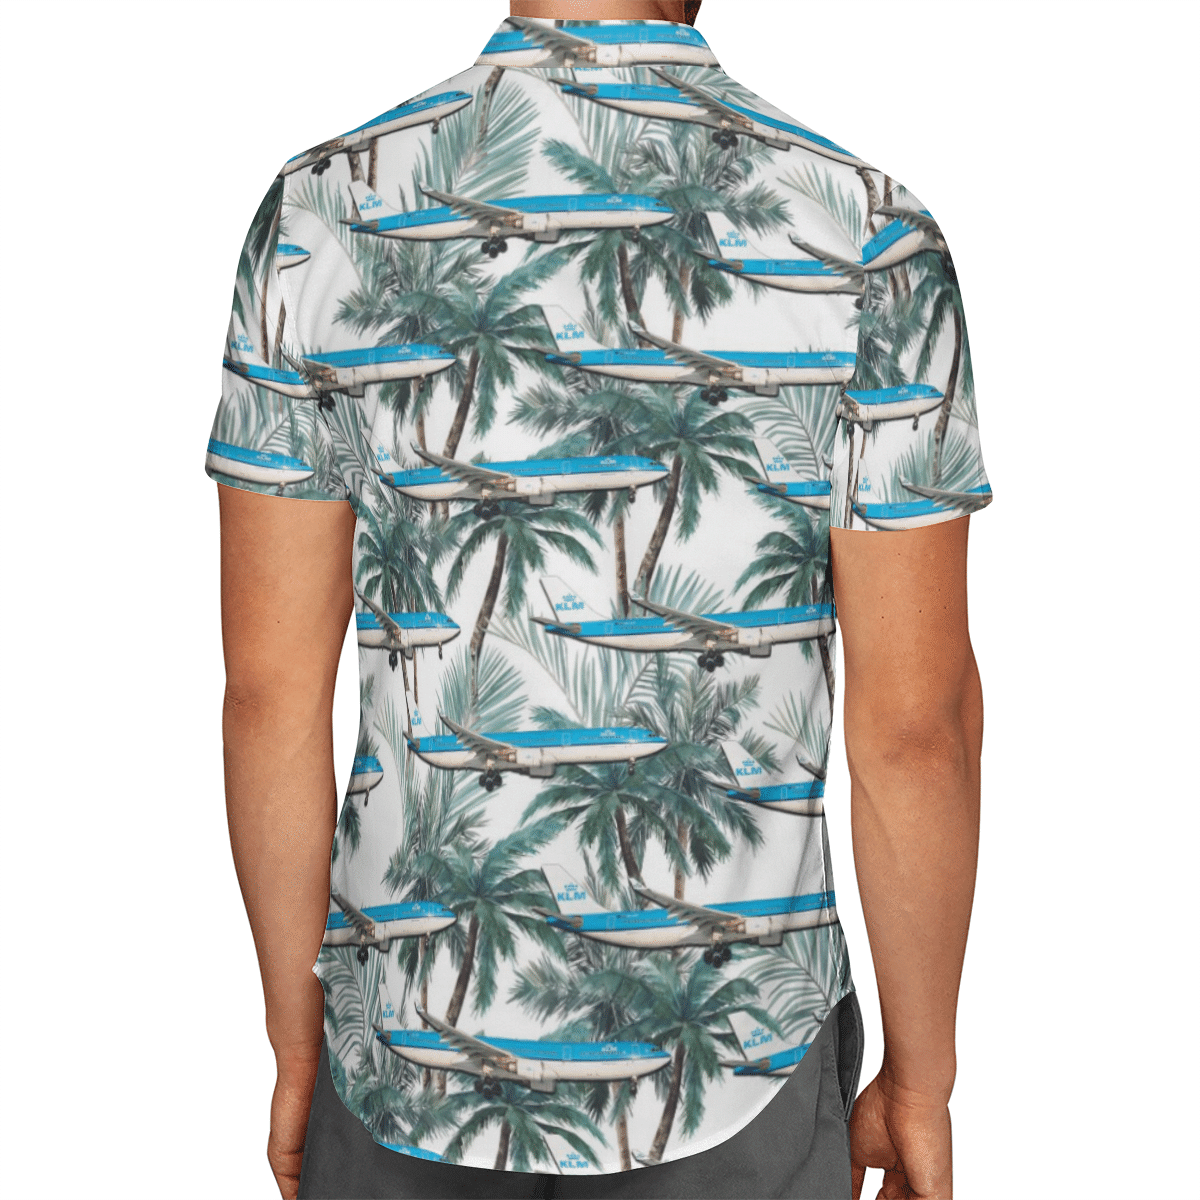 Going to the beach with a quality shirt 143